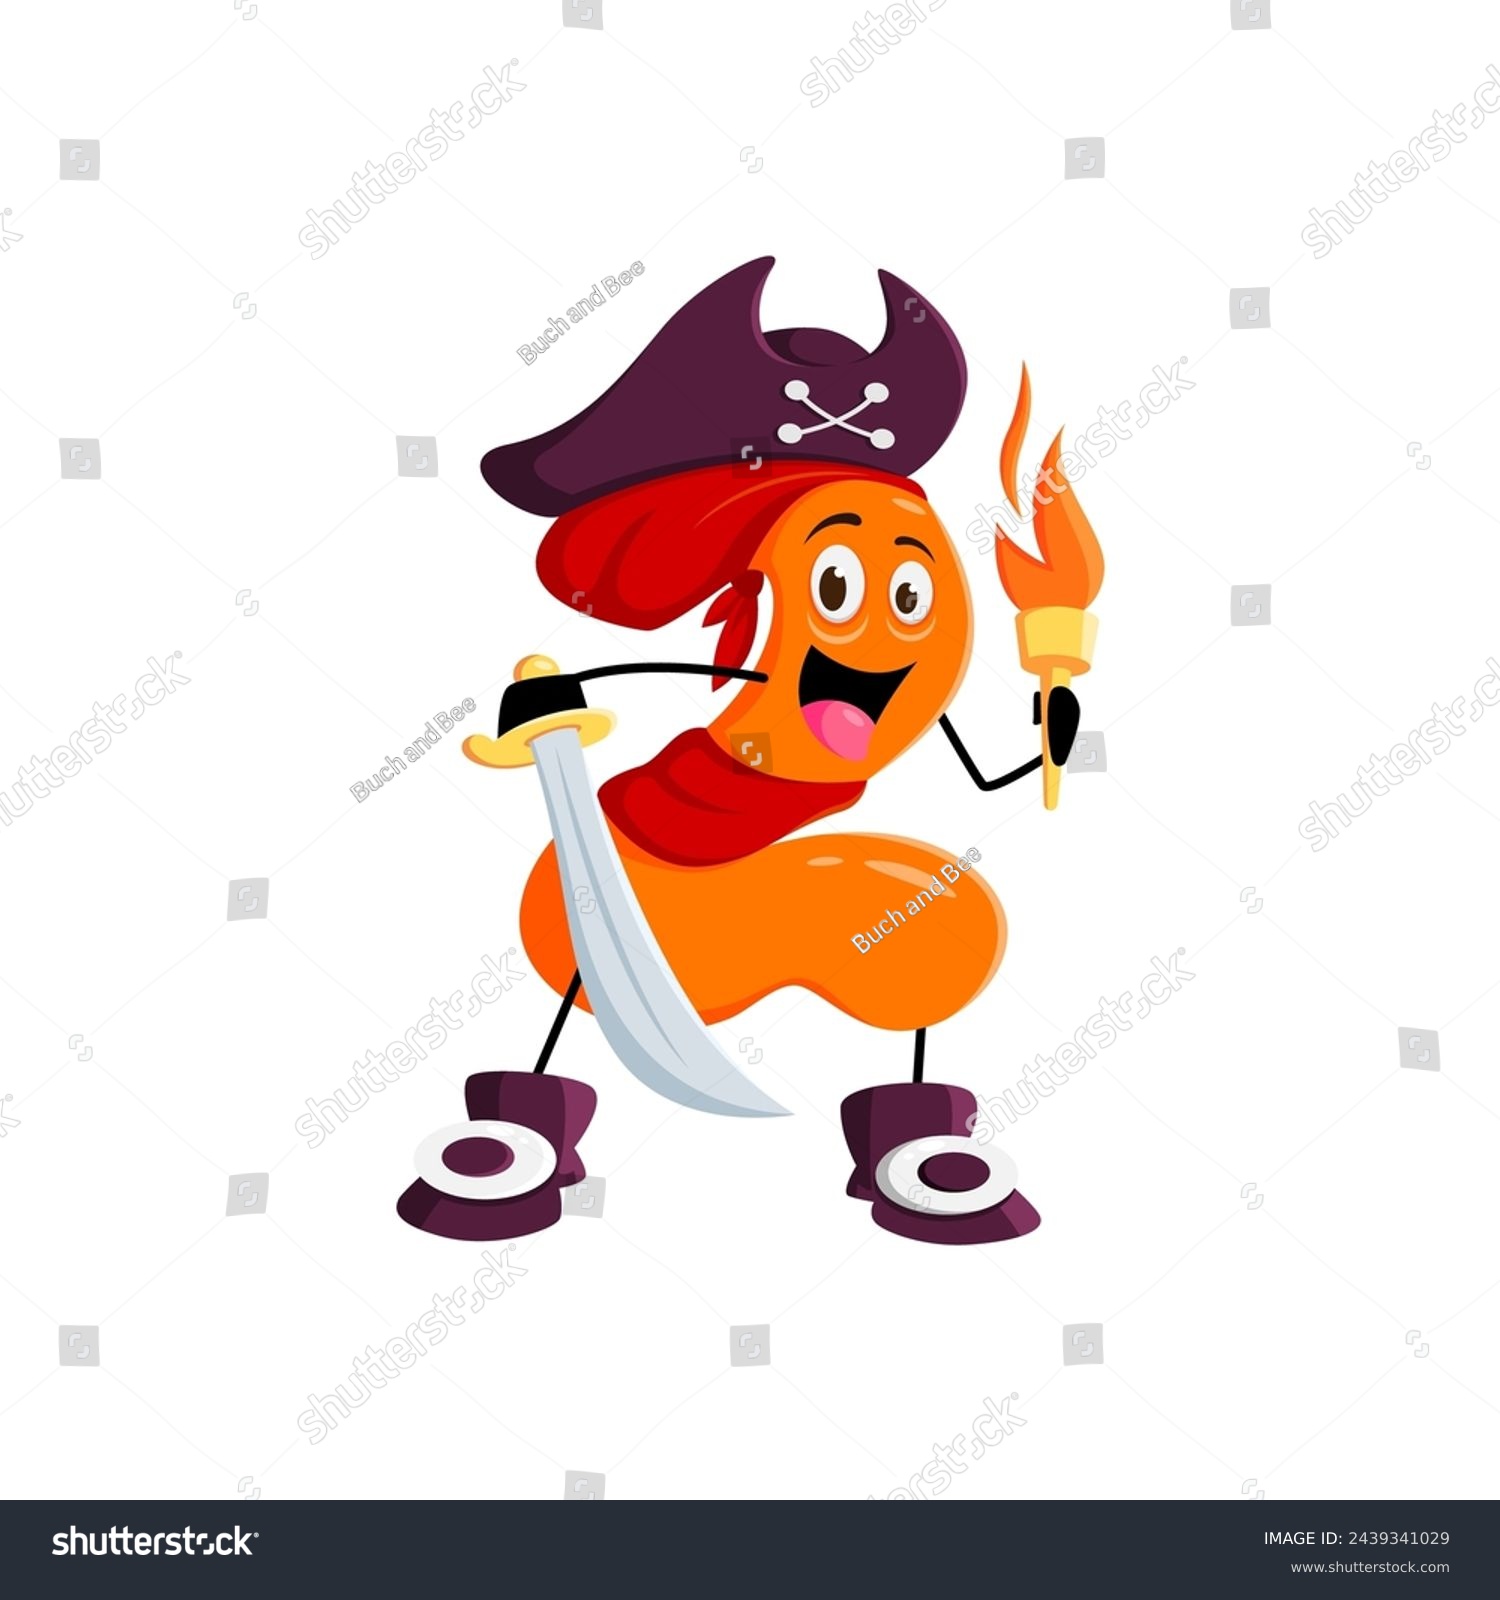 SVG of Cartoon math number two pirate captain and corsair sailor character. Isolated vector 2 personage wields a sharp sword, with a torch in hand, this numerical buccaneer adds adventure to arithmetic svg